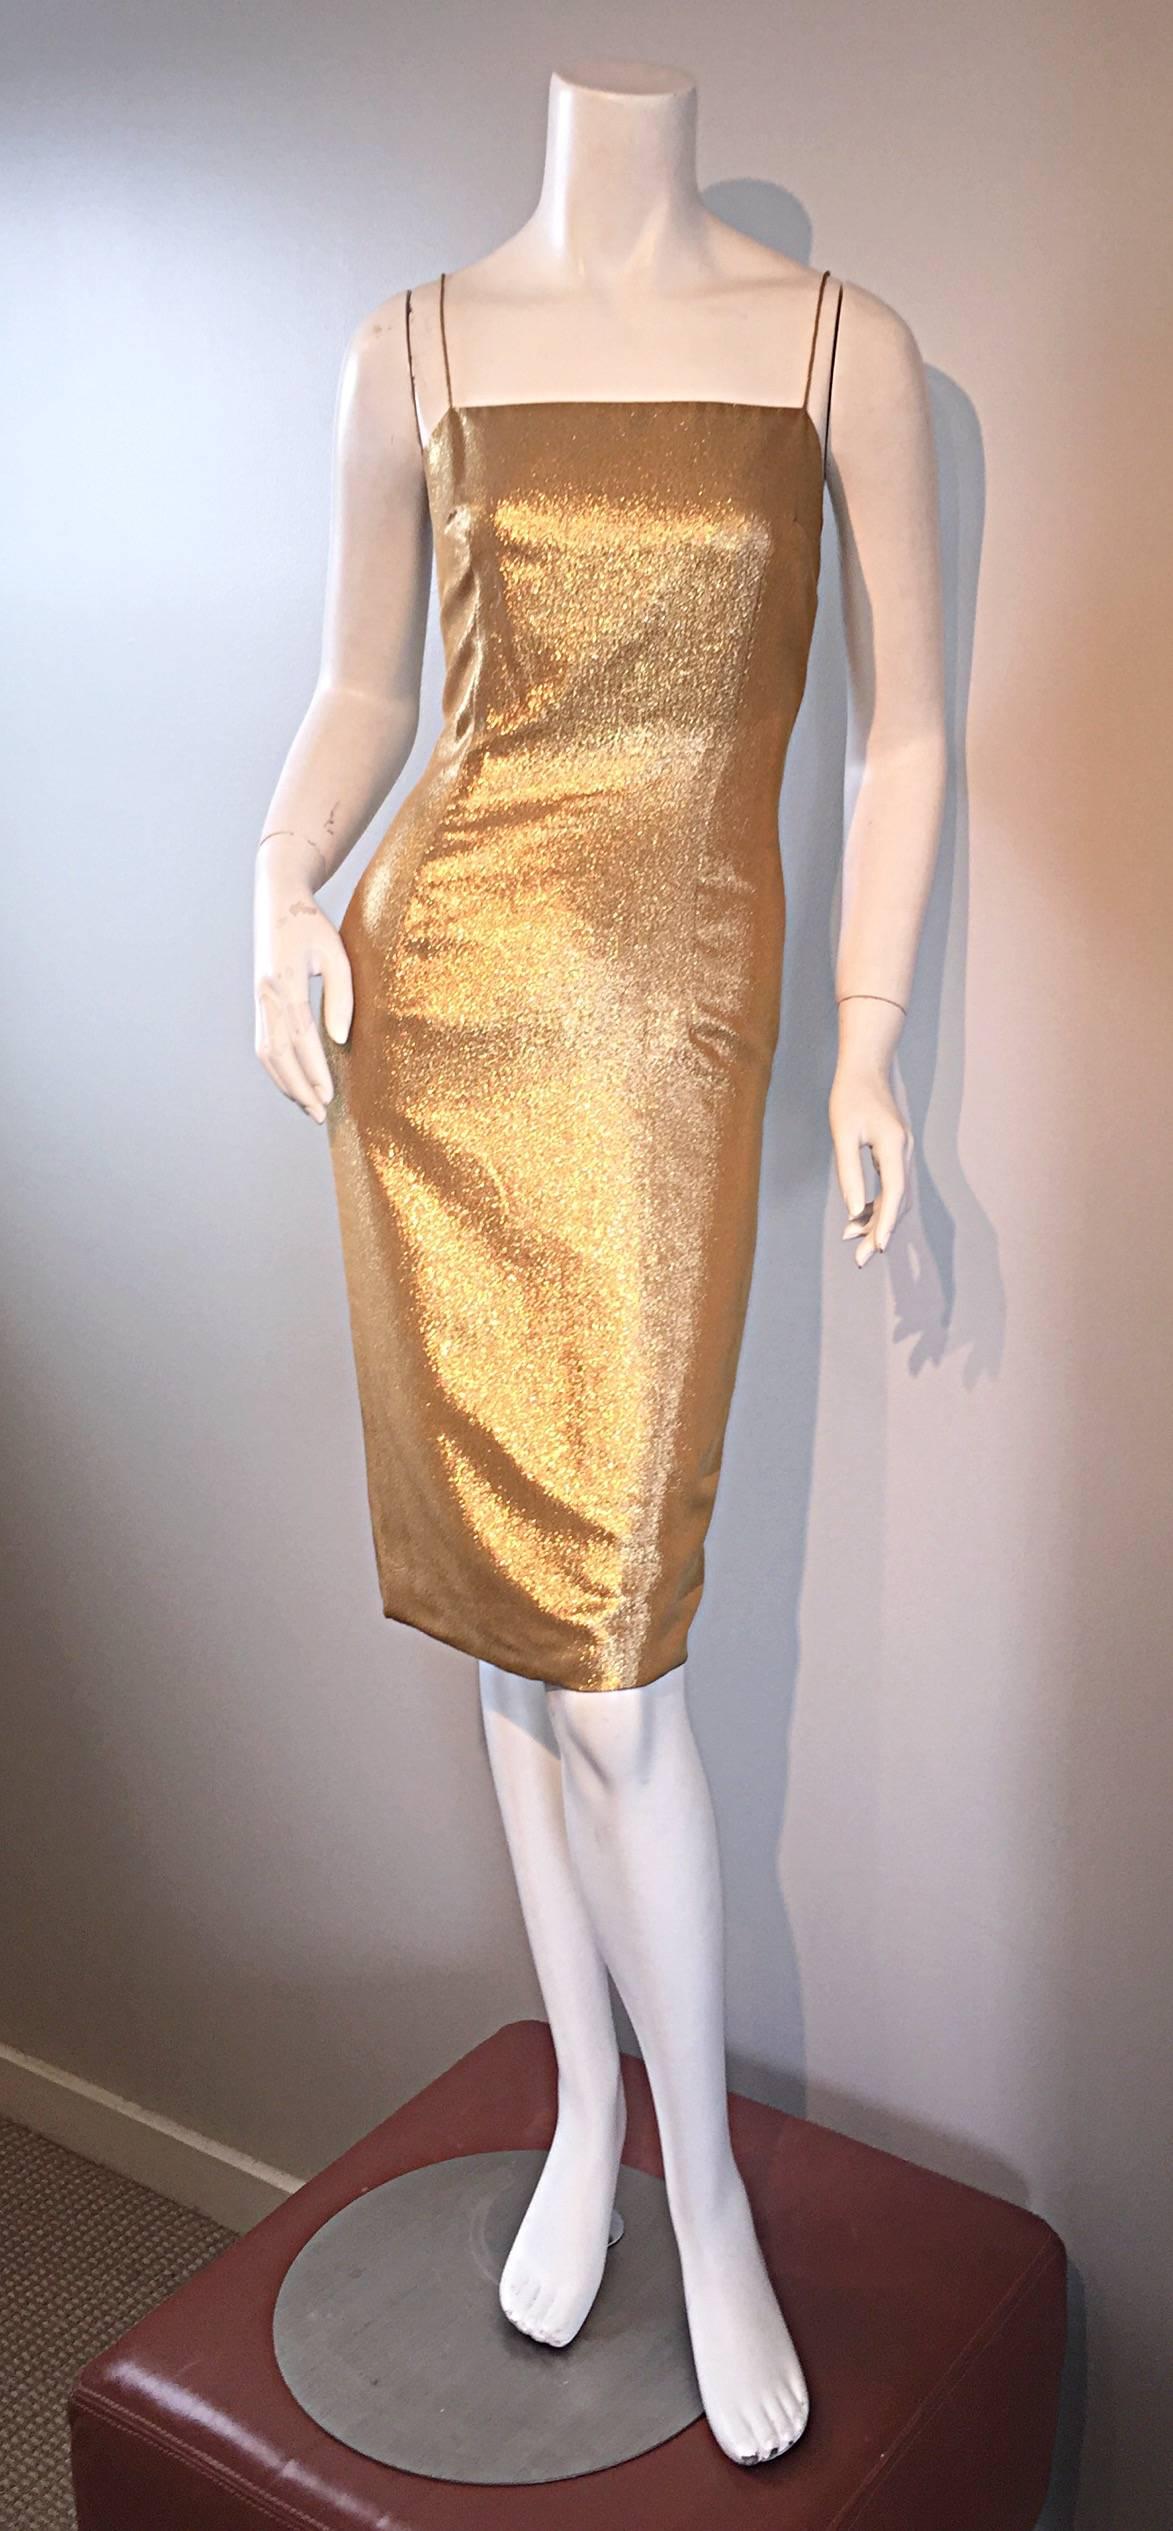 Bombshell 50s GEORGETTE TRILERE, for Bullocks Wilshire, gold metallic silk wiggle dress! Words cannot even begin to describe how utterly gorgeous this dress is on! Timeless elegance, with a hugging fit that flatters every inch of the body. Thin